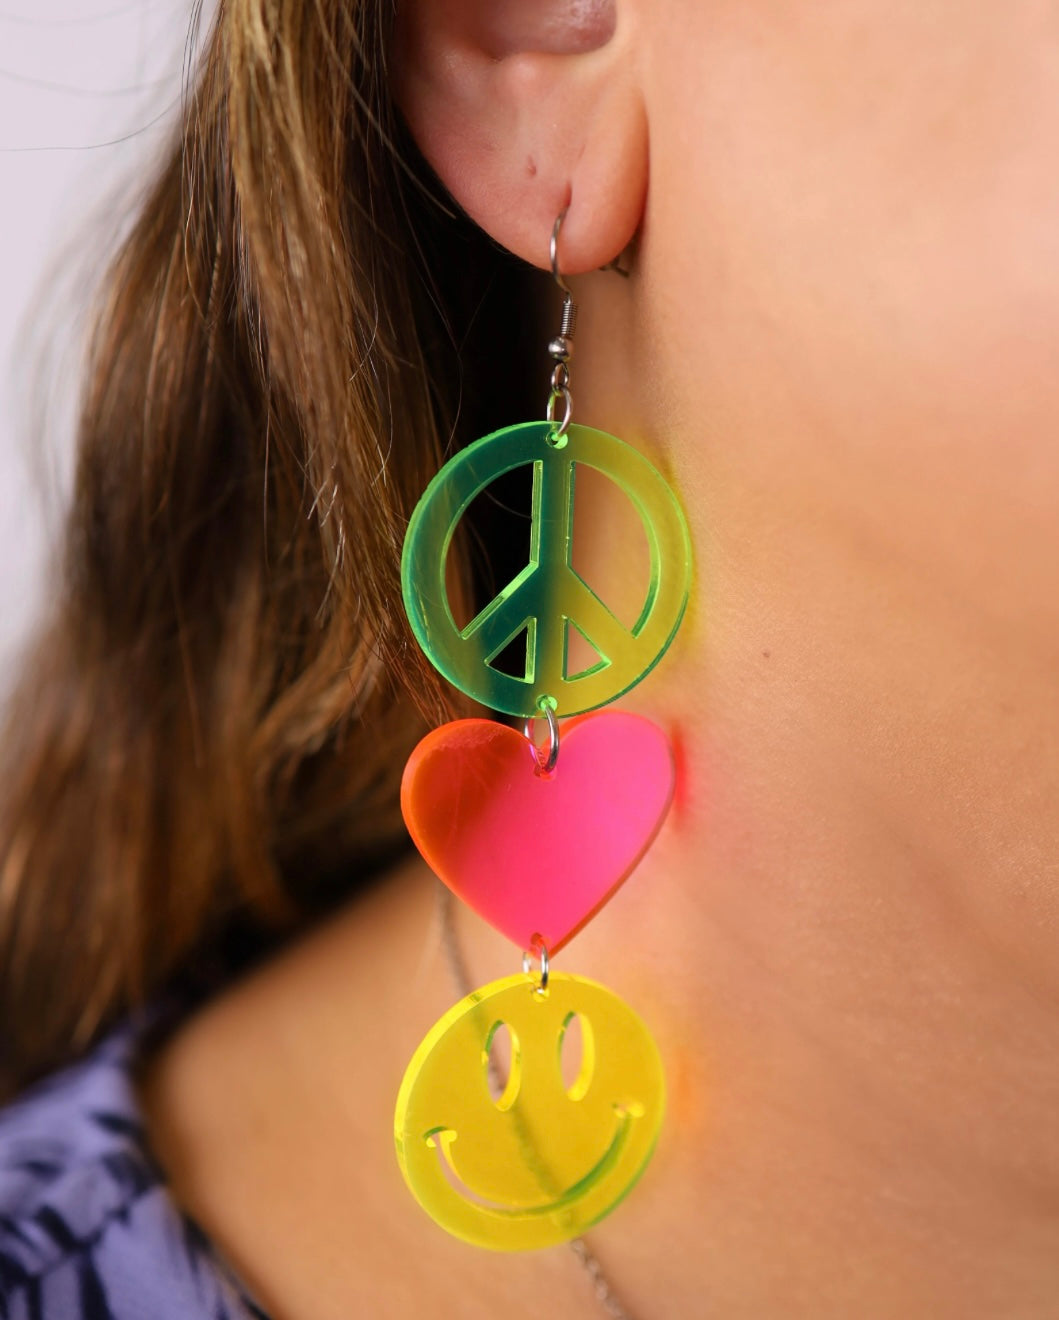 Peace, Love, and Happiness Earrings - Blacklight Reactive!